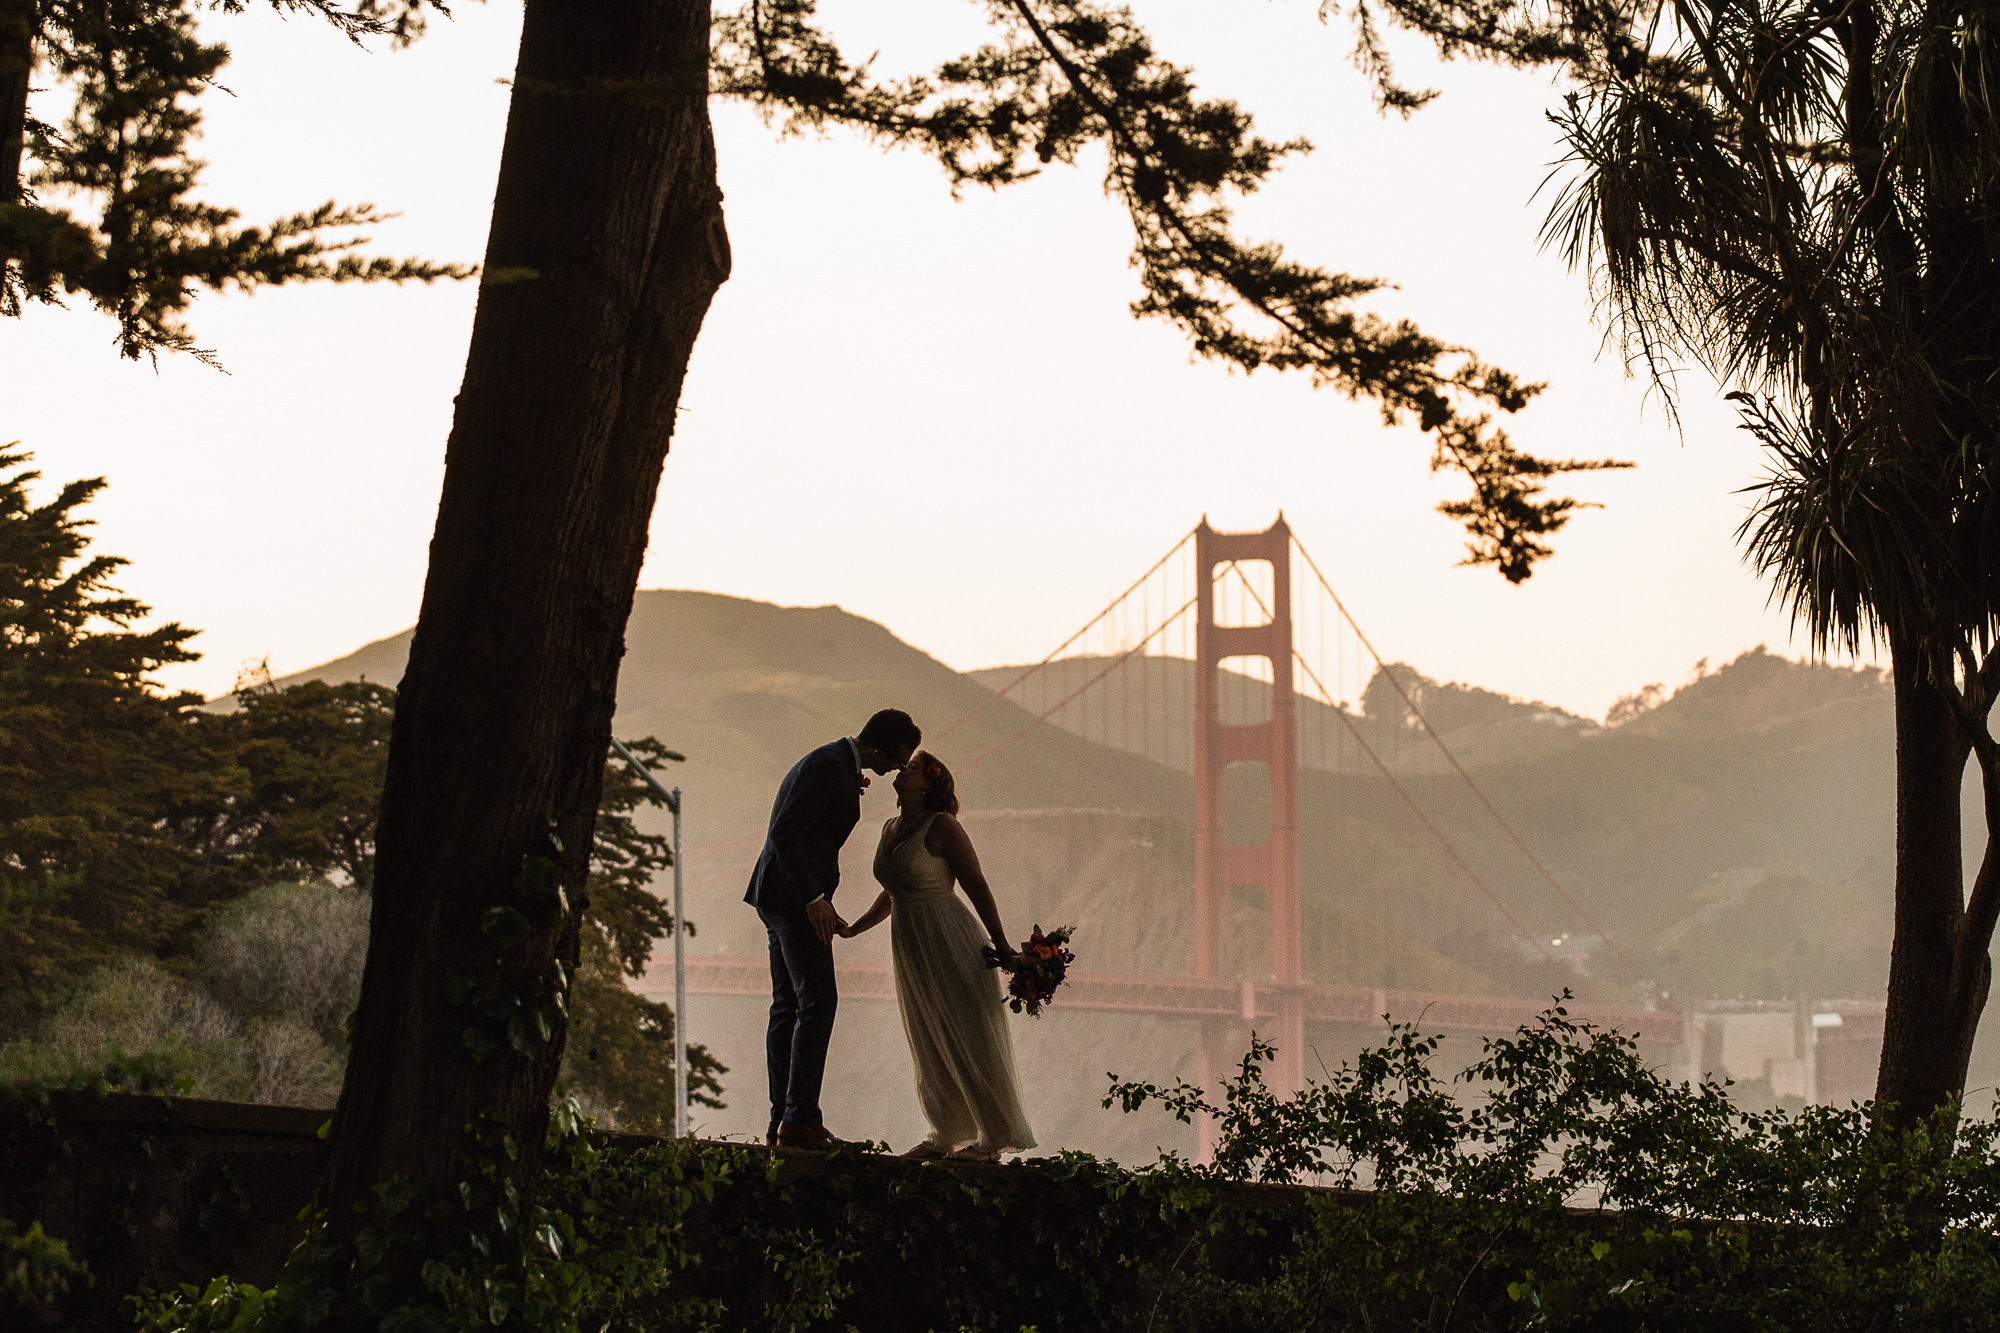 Bride and groom wedding couple silhouetted at sunset at The Golden Gate Club a wedding venue in the Presidio of San Francisco.